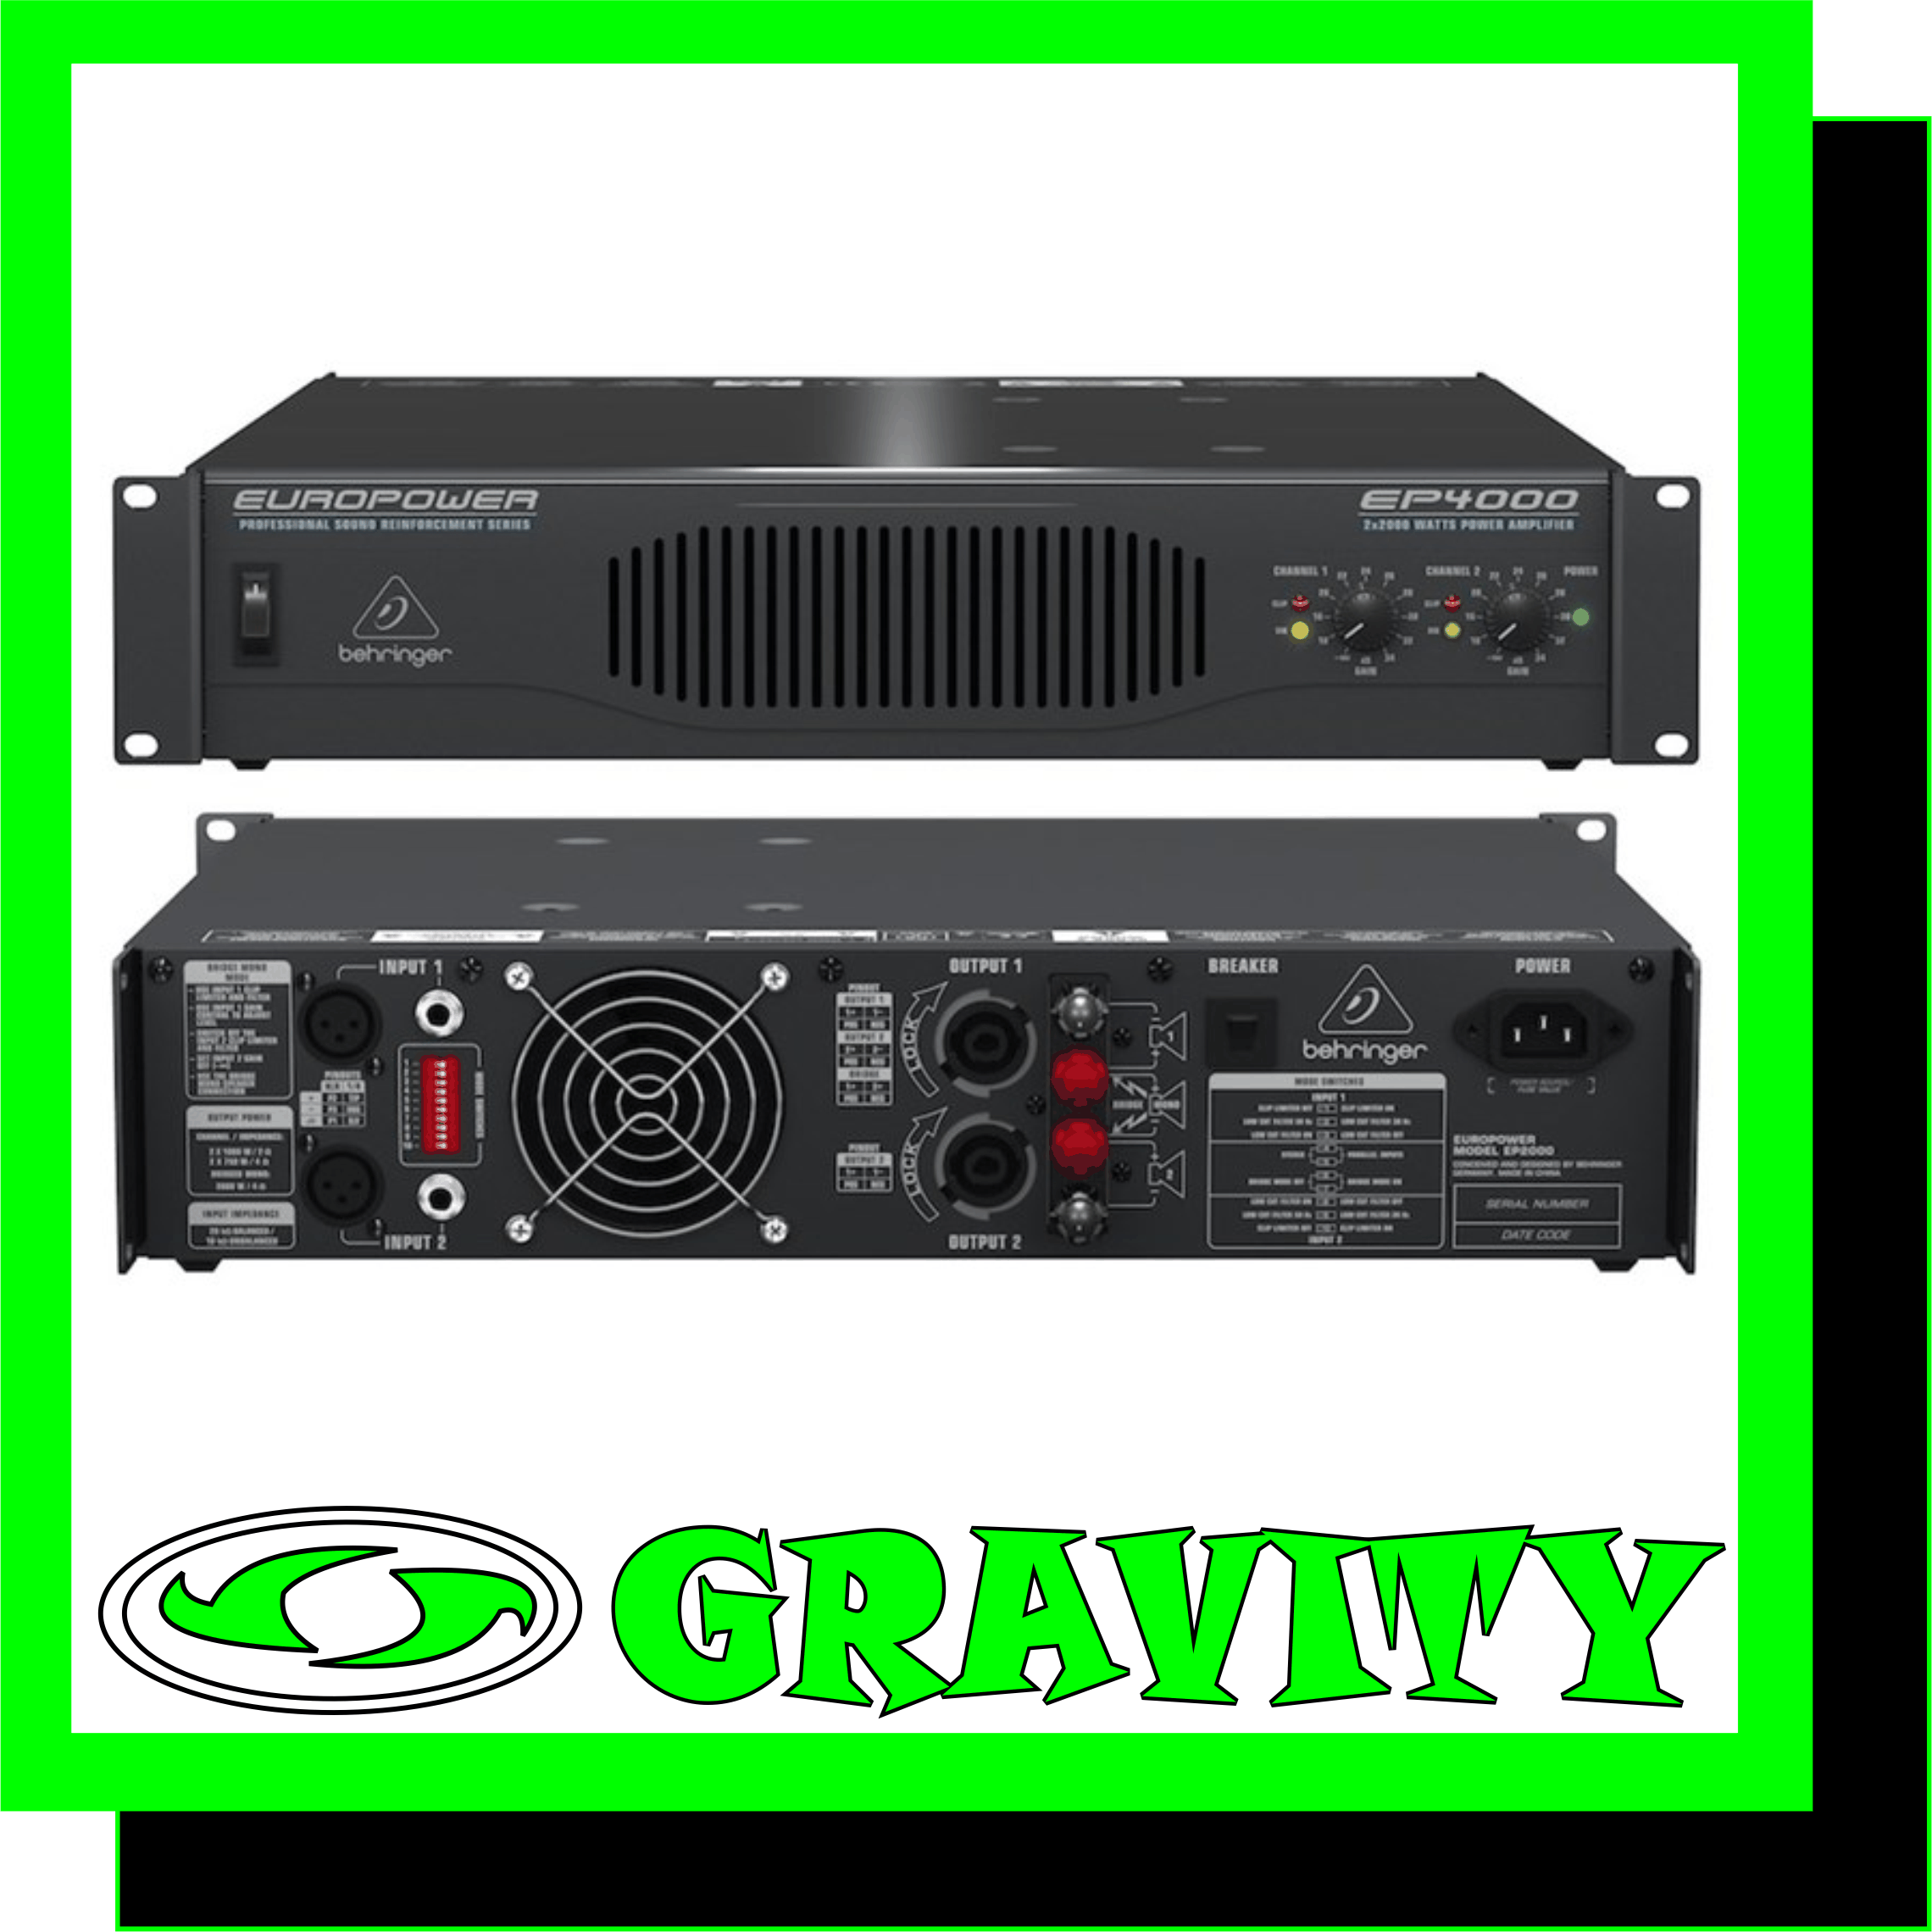 EP4000  Product Features: -2 x 2,000 Watts into 2 Ohms; 2 x 1,400 Watts into 4 Ohms; 4,000 Watts into 4 Ohms (bridge mode) -ATR (Accelerated Transient Response) technology for ultimate punch and clarity -Switchable limiters offer maximum output level with reliable overload protection -Detented gain controls for precise setting and matching of sensitivity -Precise Power, Signal and Clip LEDs to monitor performance -XLR and 1/4? TRS input connectors for compatibility with any source -Professional speaker connectors and “touch-proof” binding posts support most speaker wiring systems -Selectable low-frequency filters remove damaging infra-sound frequencies -Independent DC and thermal overload protection on each channel automatically protects amplifier and speakers -High-current toroidal transformer for ultra-high transient response and absolute reliability -“Back-to-front” ventilation system including air filter for reliable operation -“Built-like-a-tank,” impact-resistant, all-steel 2U rackmount chassis -High-quality components and exceptionally rugged construction ensure long life  The EP2000 and EP4000 represent everything musicians love about our popular EP1500 and EP2500—excellent sound quality, road-worthy toughness and reliability, low-noise operation and incredible power. With 2,000 and 4,000-Watts respectively, the EP2000 and EP4000 amplifiers are perfect amplifiers for medium-sized club gigs, mobile PA systems, church services or public spaces. Everything You Need, Nothing You Don’t The über-simple front panel controls of these amps give you all of your sound’s vital signs at a glance. After flipping the Main switch, the Power LED will light when the amp is ready for action. Both channels have independent gain dials as well as Clip LEDs that indicate when the signal is distorted and you need to reduce the gain. There are also Signal LEDs that light up when a signal is present at the input.  Panel Discussion A panel of switches found on the back panel offers an array of cool options to apply to both channels of the EP2000 and EP4000. The Clip Limiter lets you get even more out of the amplifier without overdriving either it or your speaker system. Built-in circuitry automatically senses when the EP2000 or EP4000 is being overdriven into “clipping” and then momentarily reduces the input level to avoid clipping distortion. Since this all happens in just a few thousandths of a second, it’s the ideal way to avoid audible clipping distortion. Rickety stage vibrations, mic thumps and wind noise can cause ultra-low frequency sounds, or infrasonics. While technically inaudible, they can cause a huge drain on amp power, potential damage to your speakers and a sludgy sound in the audible bass ranges. Both EP models feature a defeatable Low Cut Filter that chops off unwanted frequencies below 50 Hz or 30 Hz (depending on your PA system’s capabilities). The same panel contains the switches that put these amps to work in either Stereo or Bridge (mono) mode. Both the EP2000 and EP4000 can be linked to additional power amps by switching into Parallel mode. These Amps Have Guts  There are plenty of awesome features on the outside of the EP2000 and EP4000, but there’s also a team of cool components on the inside helping it work its magic. They come loaded with famously reliable Toshiba/Fairchild power transistors, as well as a high-current toroidal transformer for ultra-high transient response and further reliability. Independent DC and thermal overload protection on each channel automatically protects both the amplifier and your speakers. The EP2000 and EP4000 have both XLR and 1/4? TRS Inputs, plus Speakon-compatible Outputs and 5-way binding posts. Whether you’re dealing with bare wire or boutique audiophile cabling, the EP2000 and EP4000 are right at home. The exhaust fan, visible on the back panel, is the final stage of an internal back-to-front cooling system that keeps these amps working in the mild temperatures they love, even through periods of extended use. Finally, an impact-resistant, all-steel 2U rack-mount chassis helps these workhorses stand up to all the rigors of the road. Accelerated Transient Response Delivers the Knock-Out Punch It takes huge pulses of energy (current and voltage) to propel a woofer cone out fast enough to match a bass beat. That’s called Transient Response and it’s the holy grail of amp designers. By carefully selecting transistors with extremely high slew rates and optimizing other proprietary parts of our circuitry, our amps react instantly to even the most demanding bass impulses. If the woofers in your PA system can keep up, your audience will hear a tighter, crisper, more natural sound.  The Legend Powers On Read the reviews of the EP1500 and EP2500, and it will become clear that those amps are admired by professionals every—not only for their performance and durability, but also for their astoundingly low price tags. The EP2000 and EP4000 extend that legacy to the next level. Why shell out for a “Brand-X” amp when you can get a BEHRINGER EUROPOWER amp and have money left over for other gear?